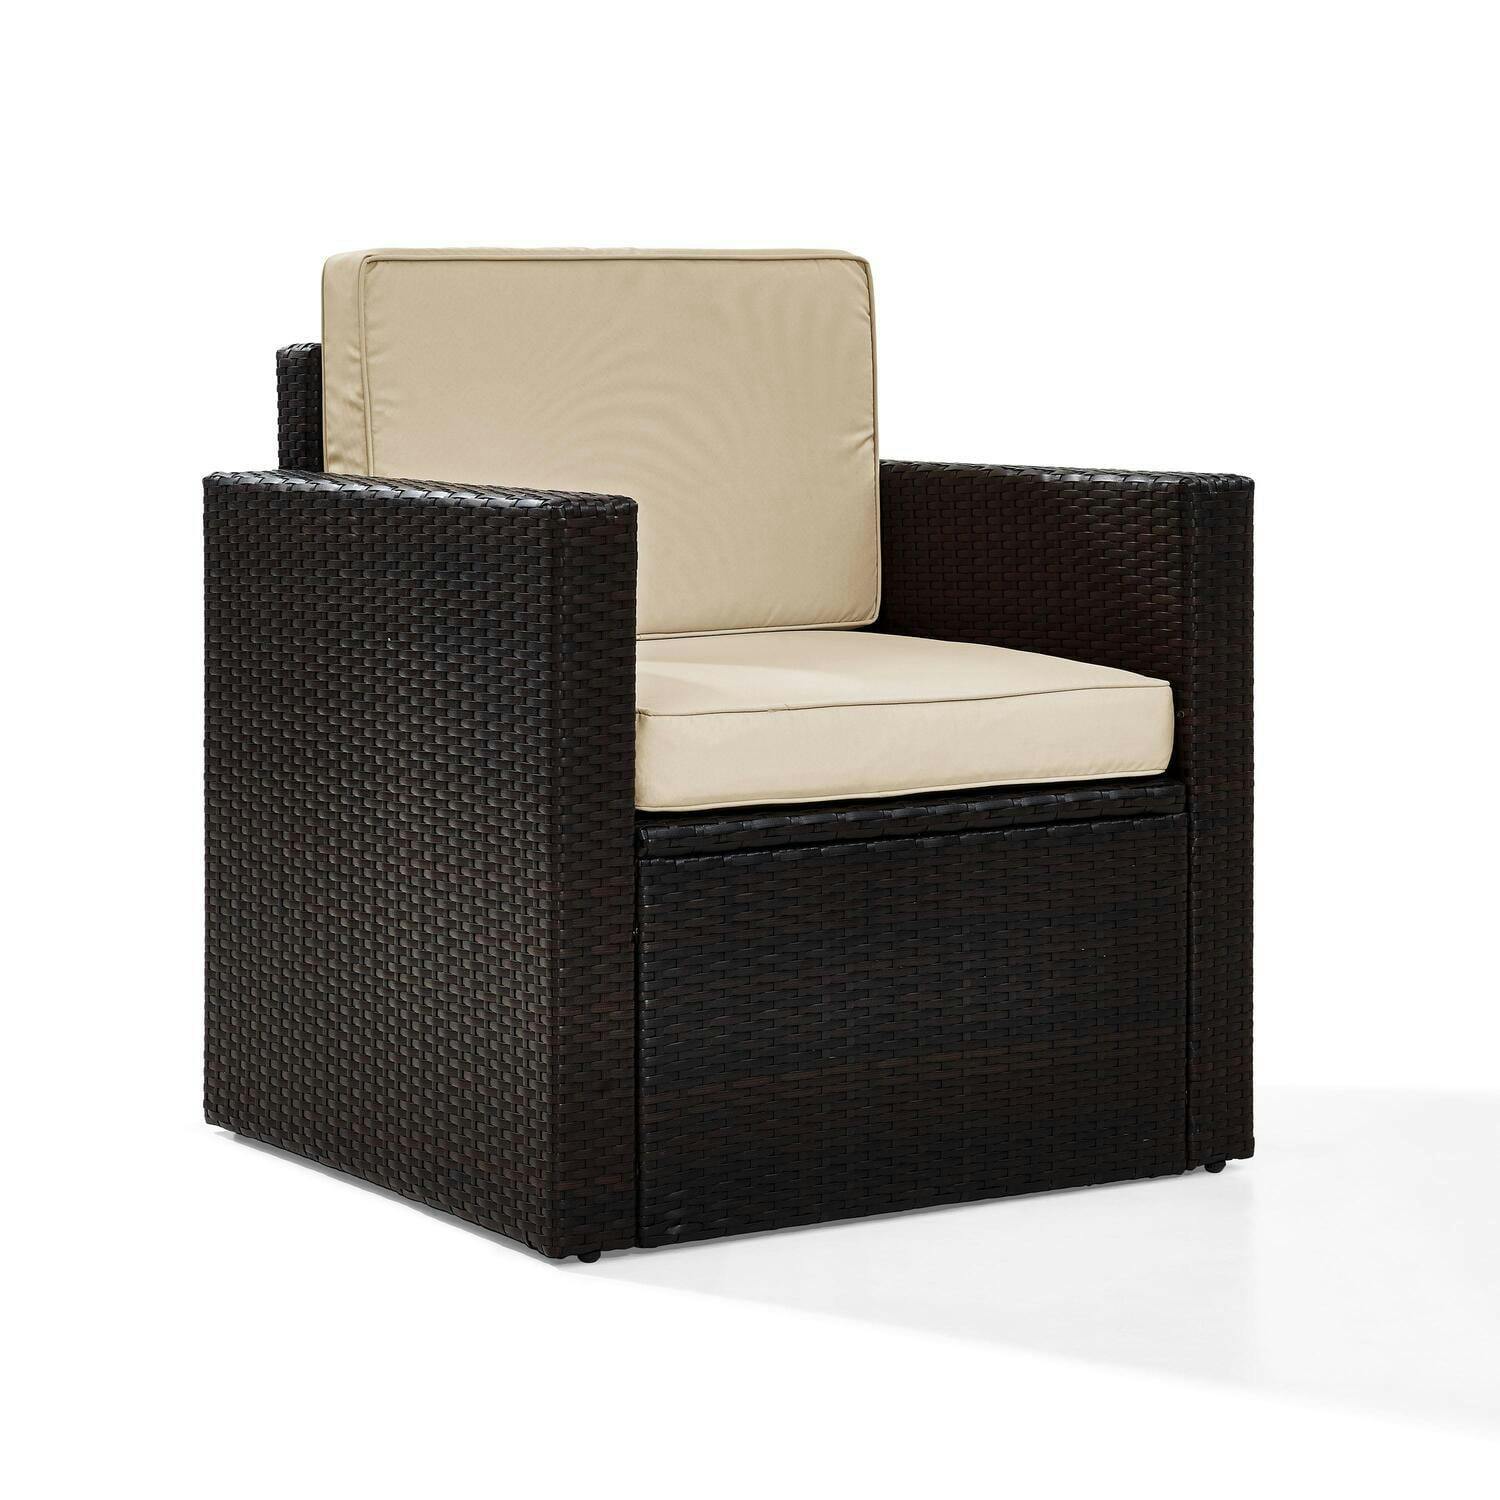 Palm Harbor Sand and Brown Outdoor Wicker Armchair with Cushions